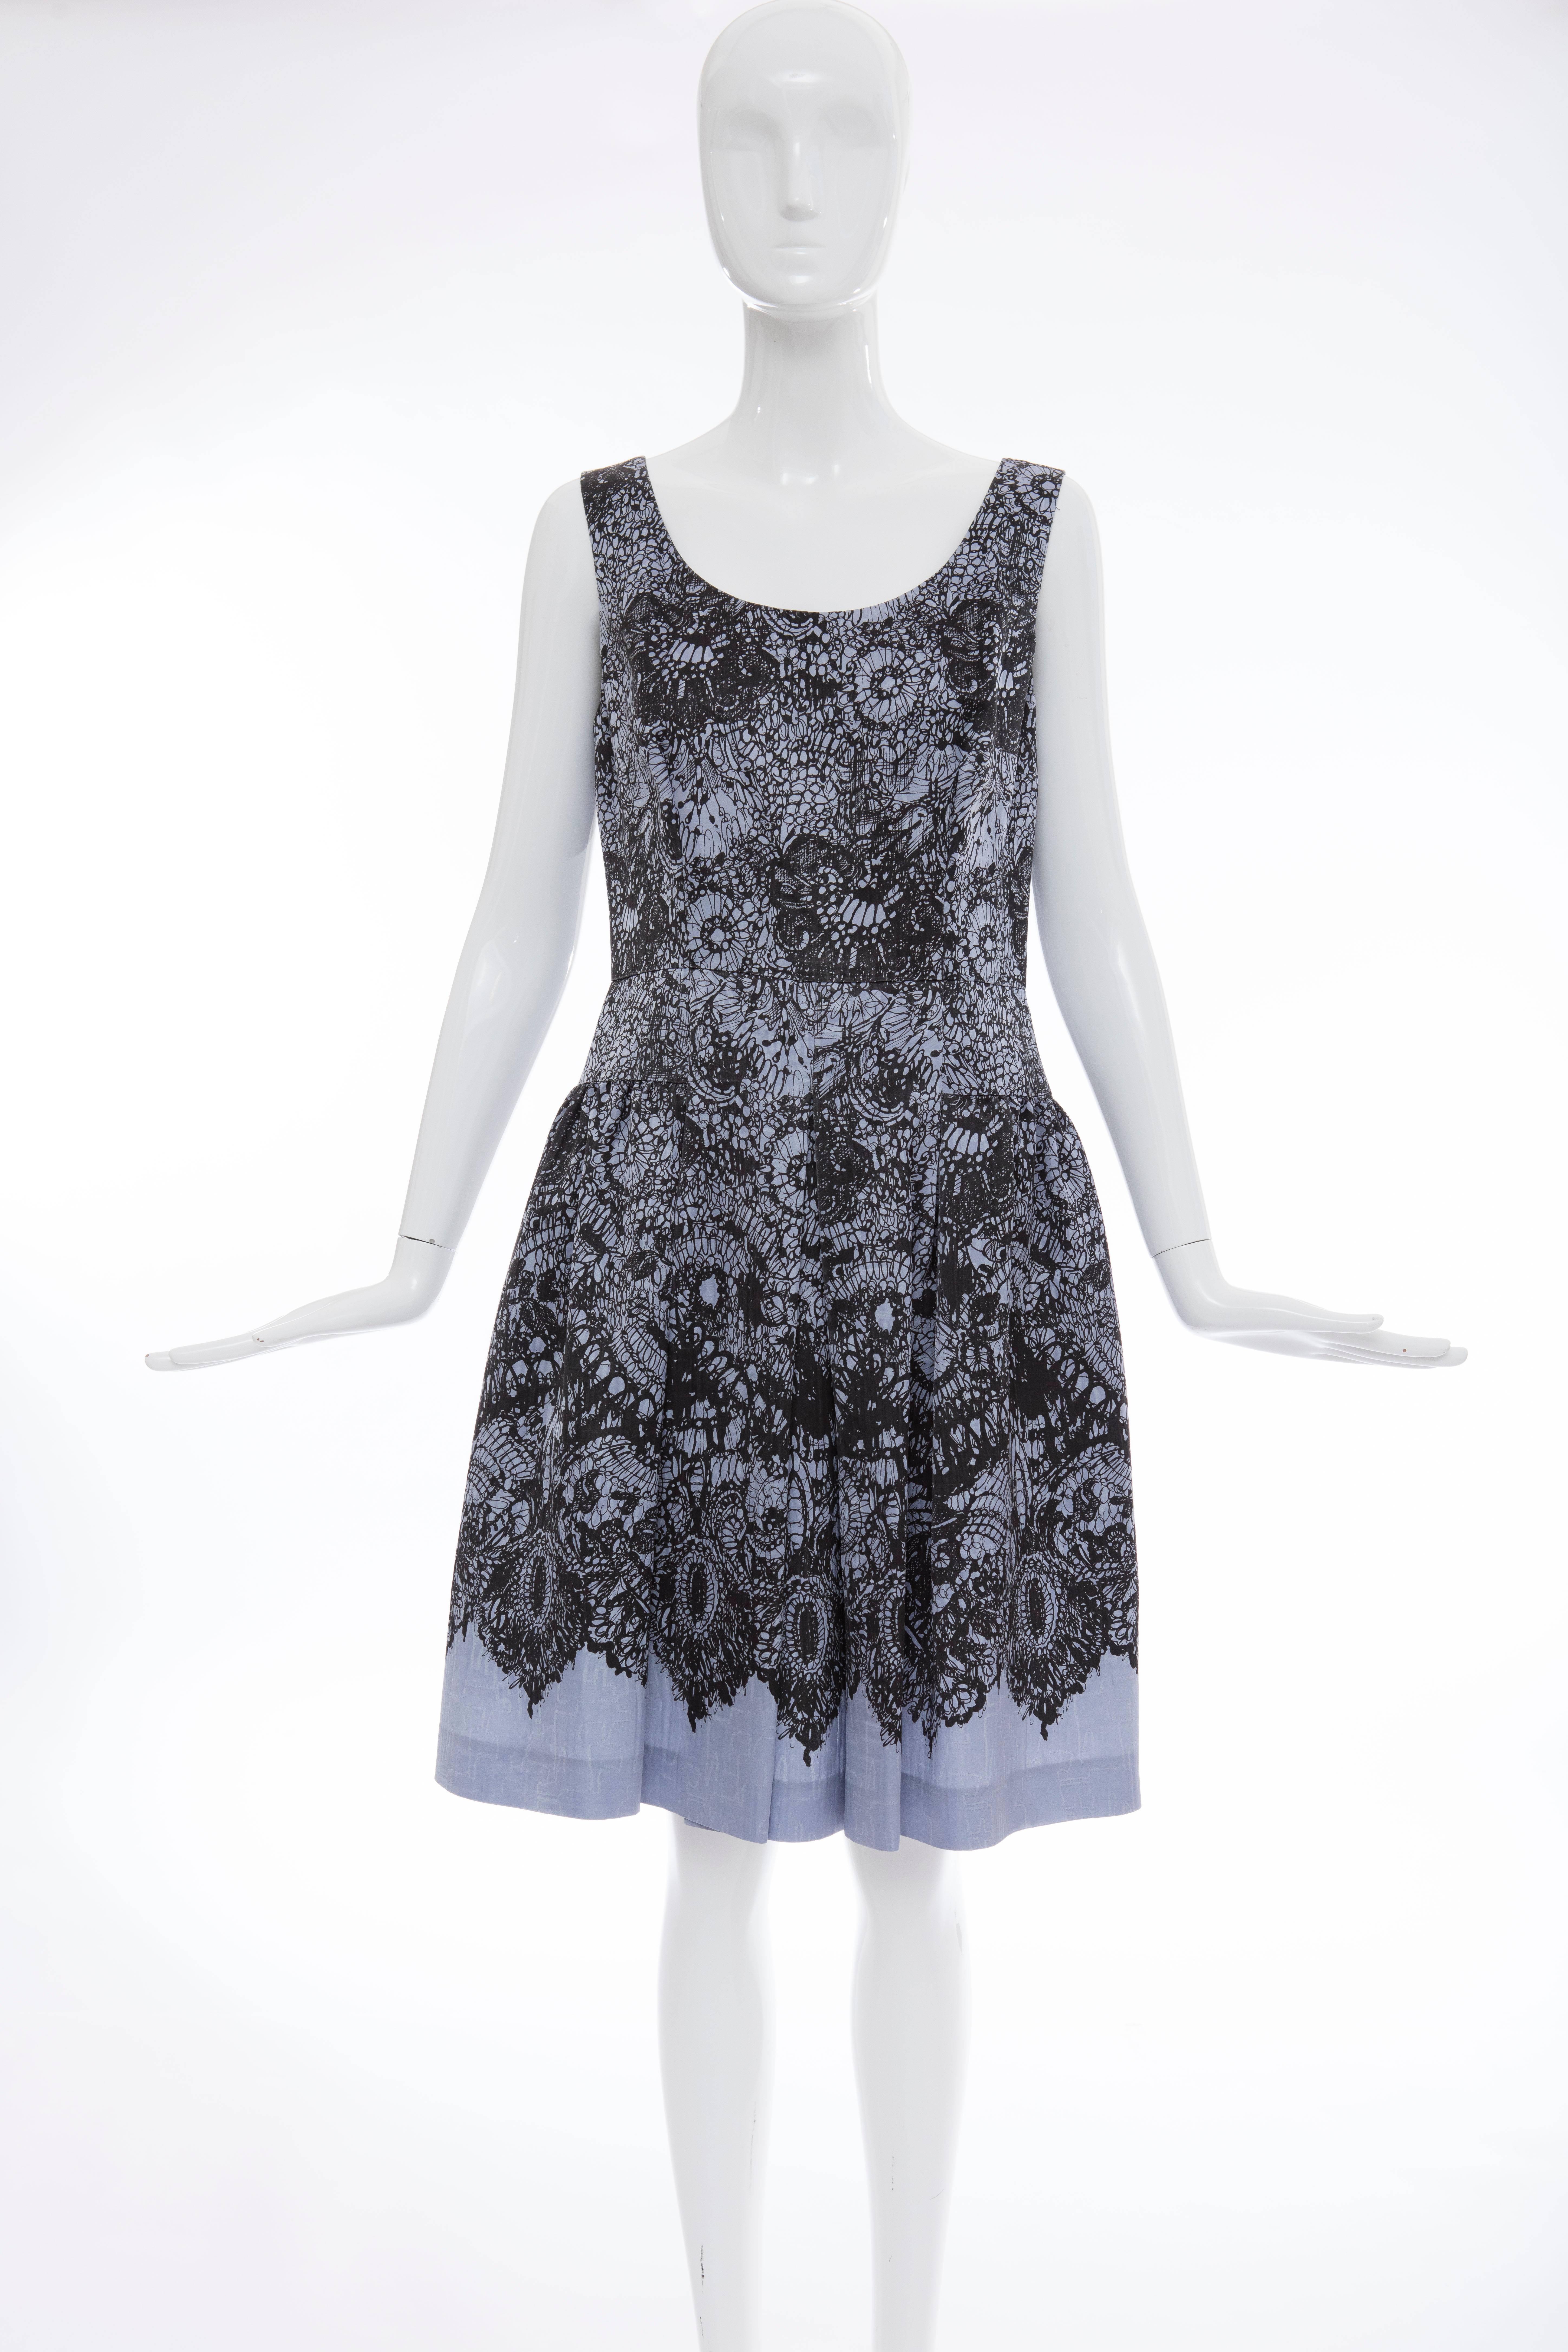 Prada, circa 2011 printed viscose silk nylon sleeveless dress with back zip and fully lined in silk.

IT. 44
US. 8

Bust 34, Waist 30, Hips 46, Length 38